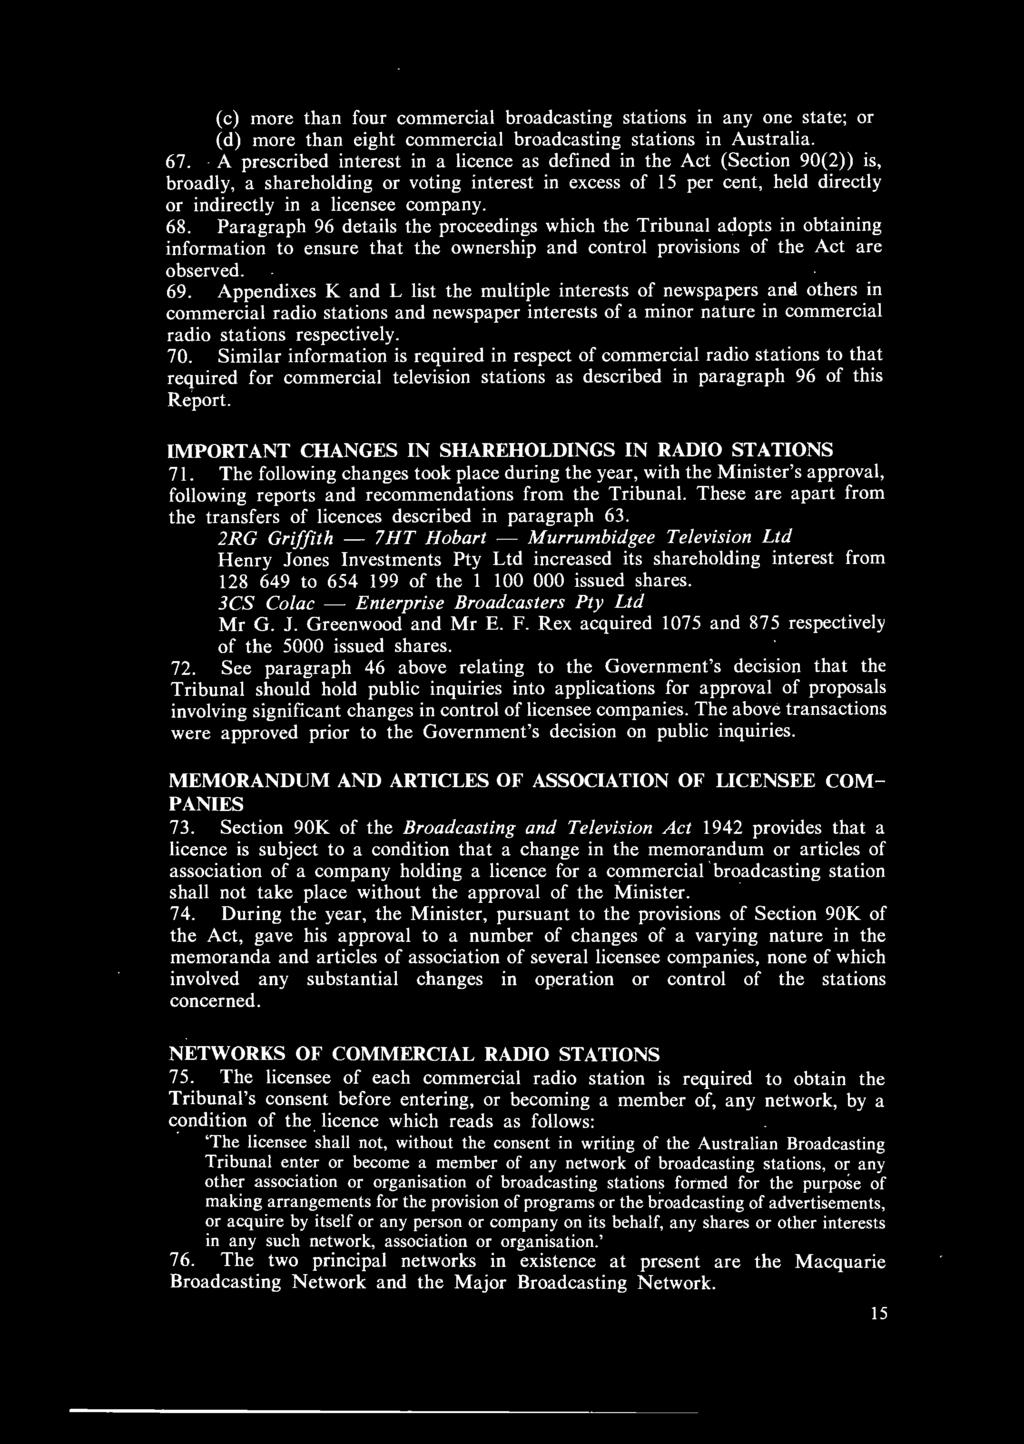 Paragraph 9 details the proceedings which the Tribunal adopts in obtaining information to ensure that the ownership and control provisions of the Act are observed. 9. Appendixes K and L list the multiple interests of newspapers anei others in commercial radio stations and newspaper interests of a minor nature in commercial radio stations respectively.